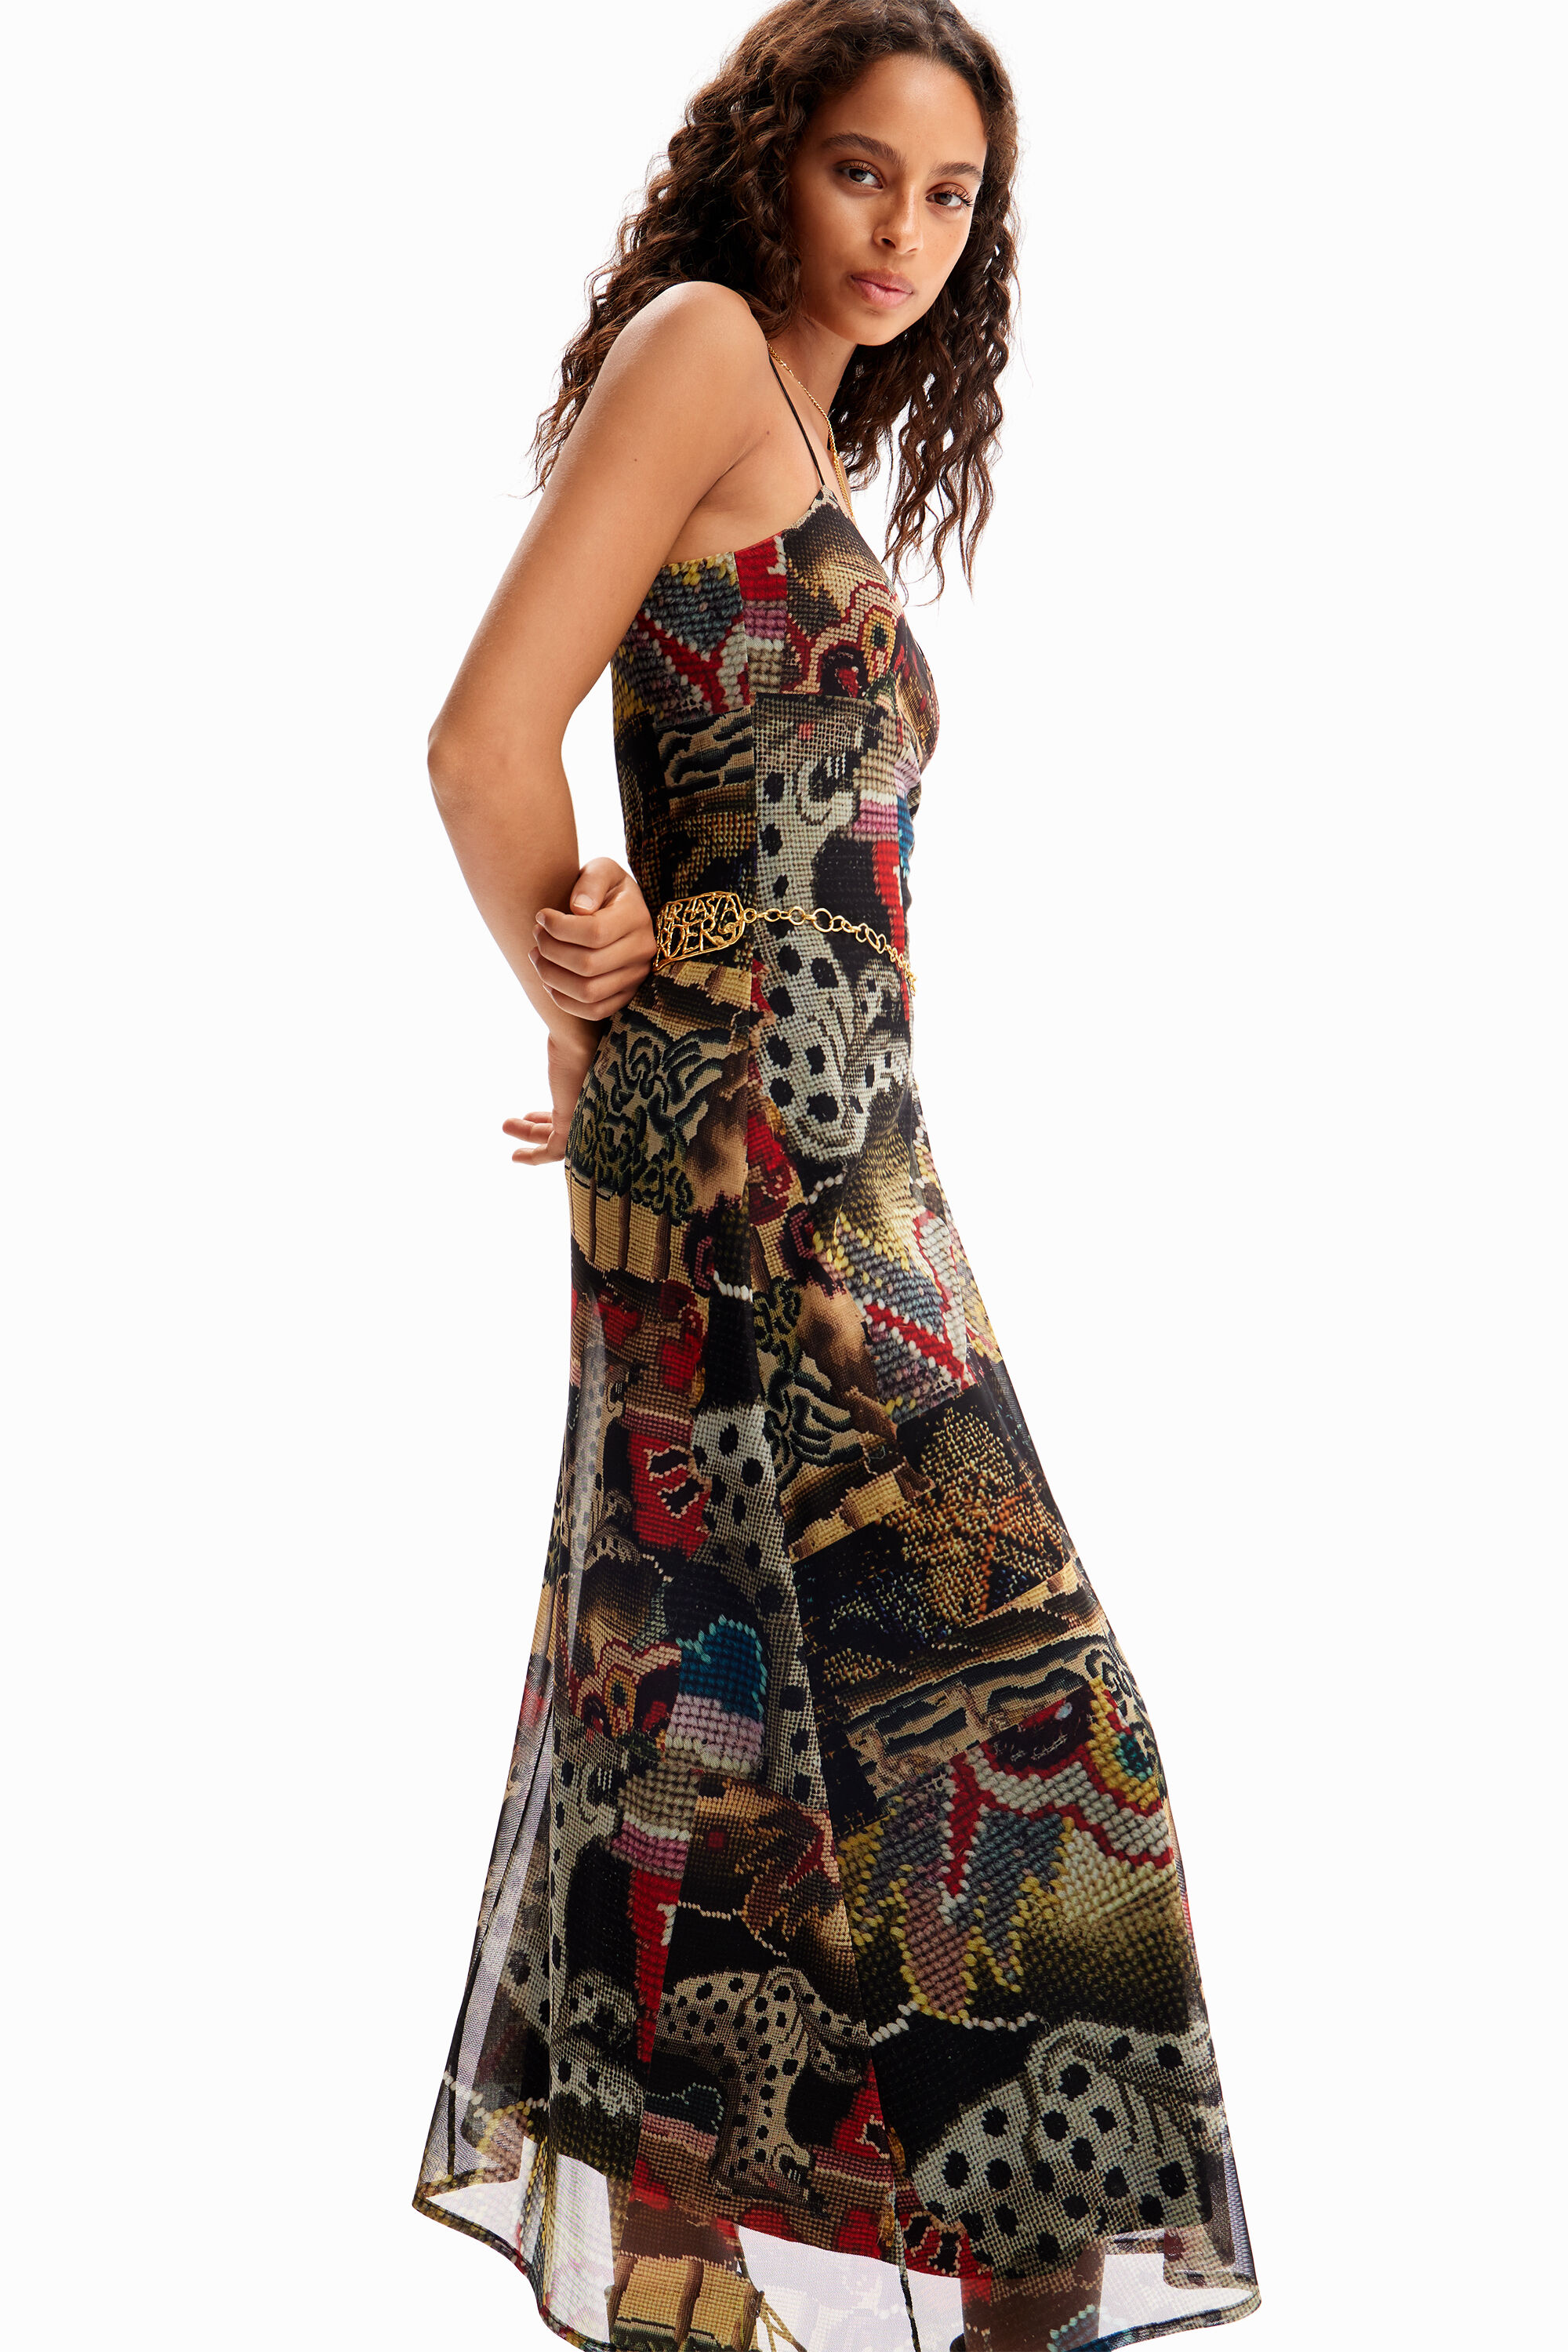 New Desigual Tapestry dress by Christian Lacroix Fall-Winter 2023 collection now at Angel of Vancouver Canada